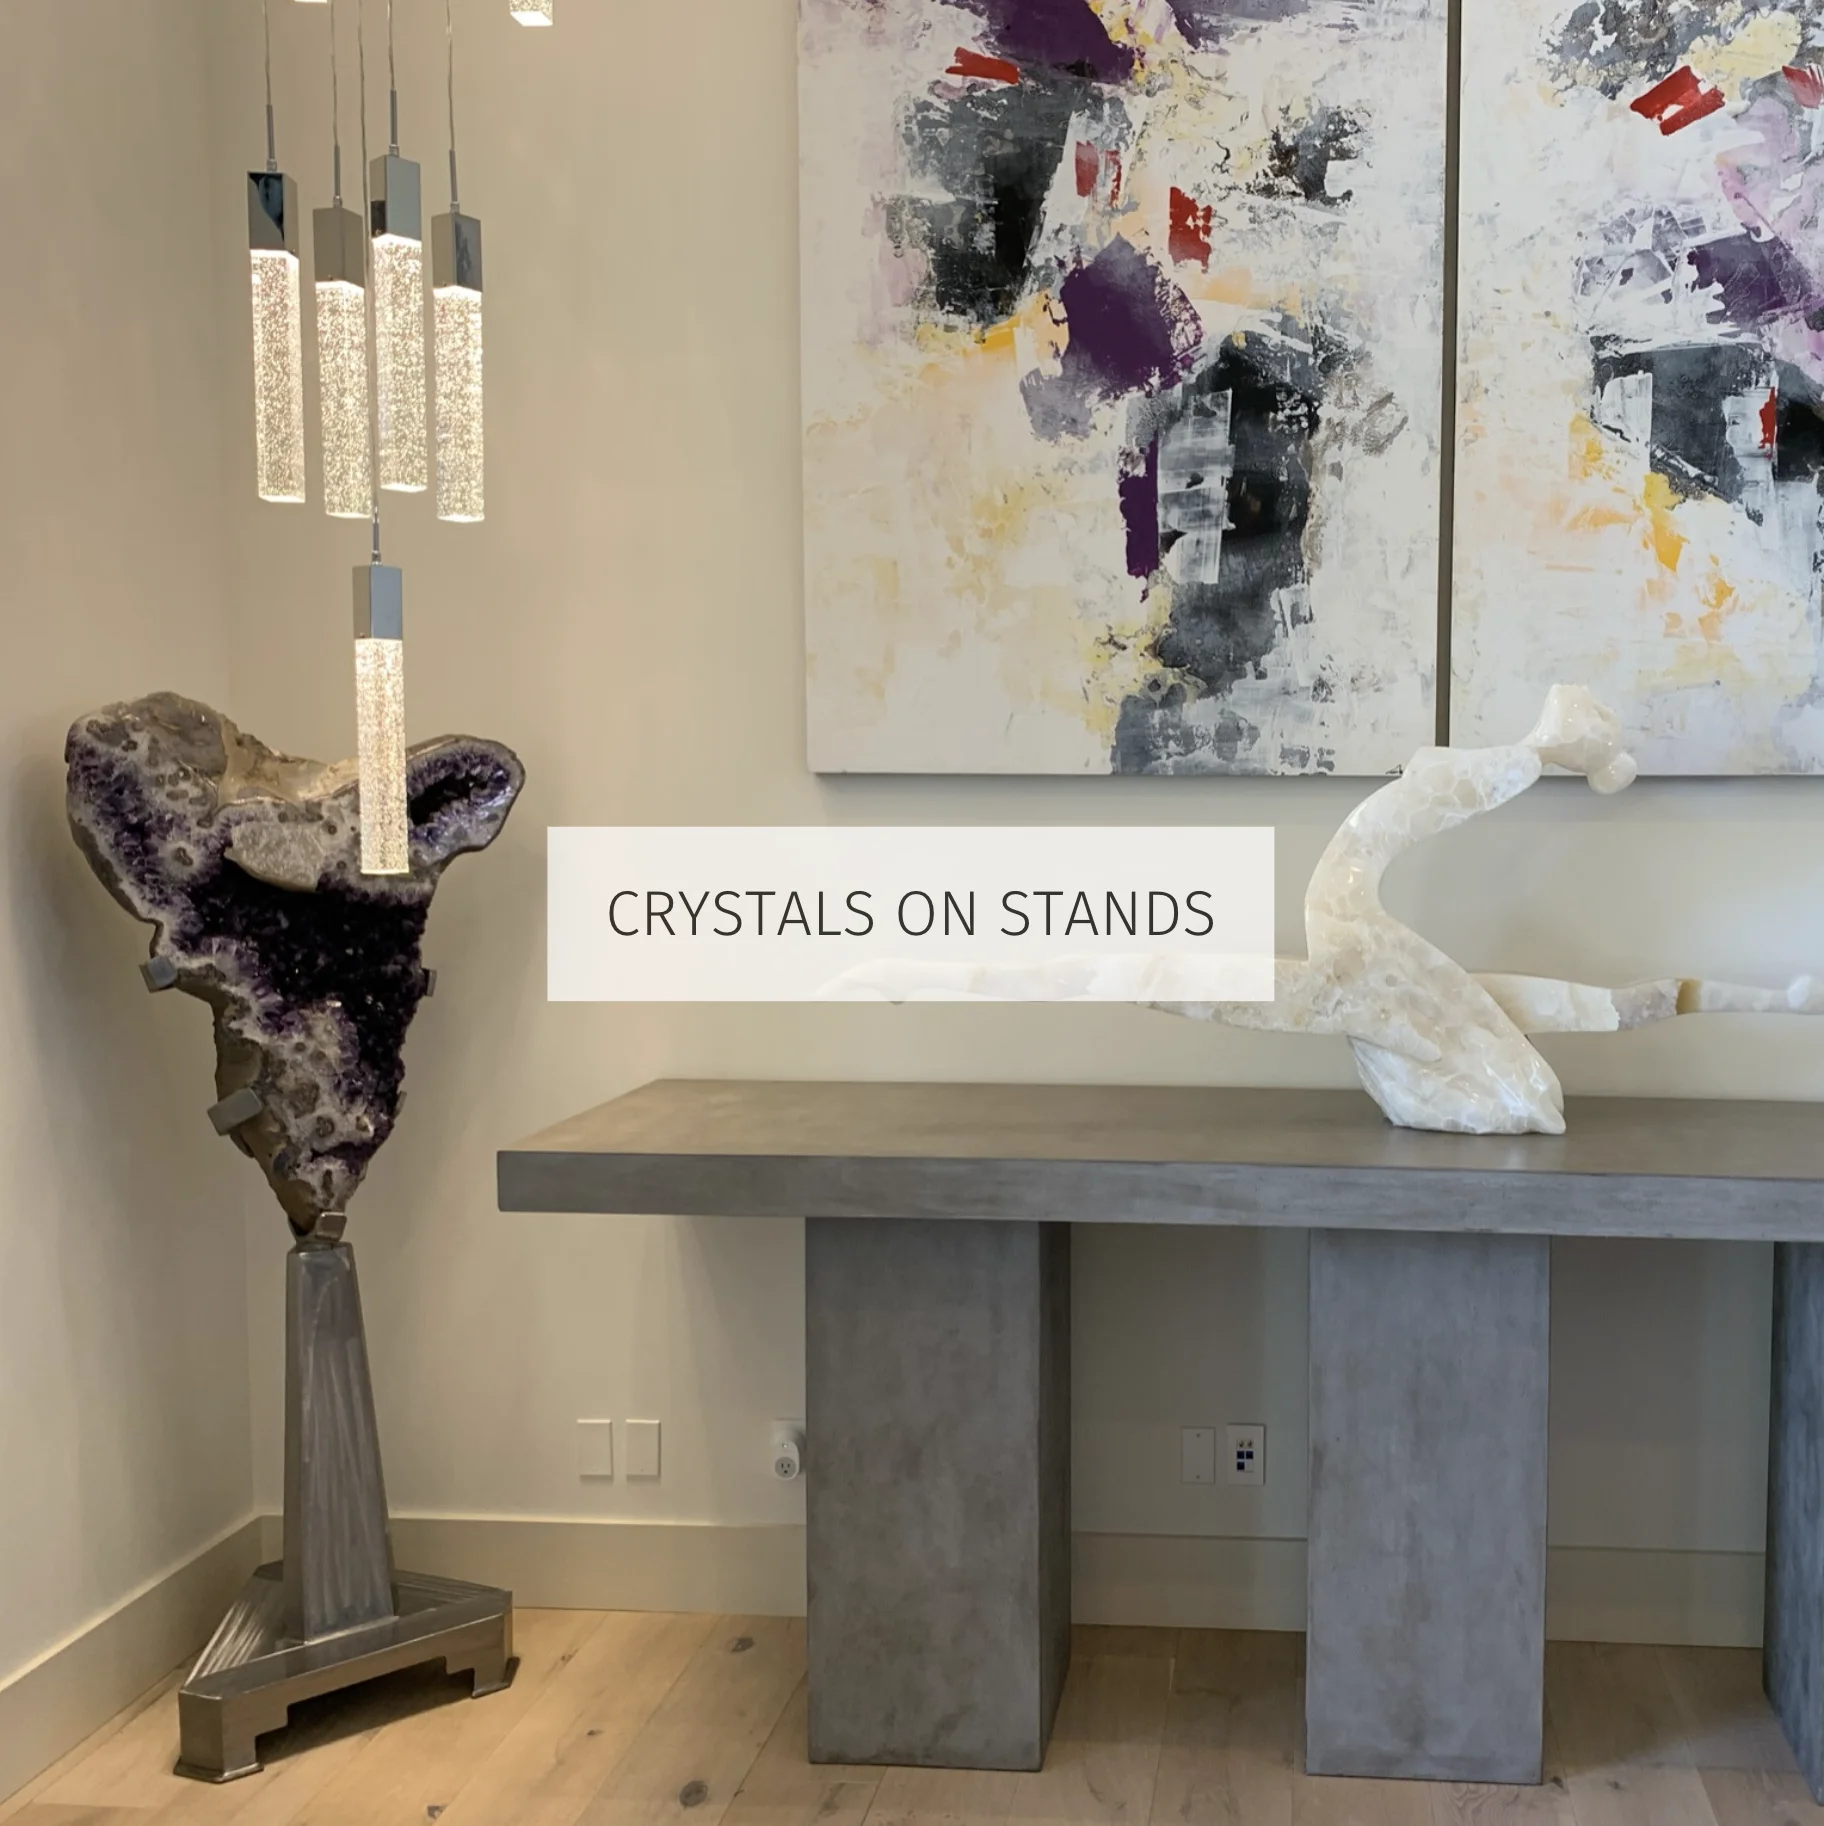 Crystals Geodes On Stands